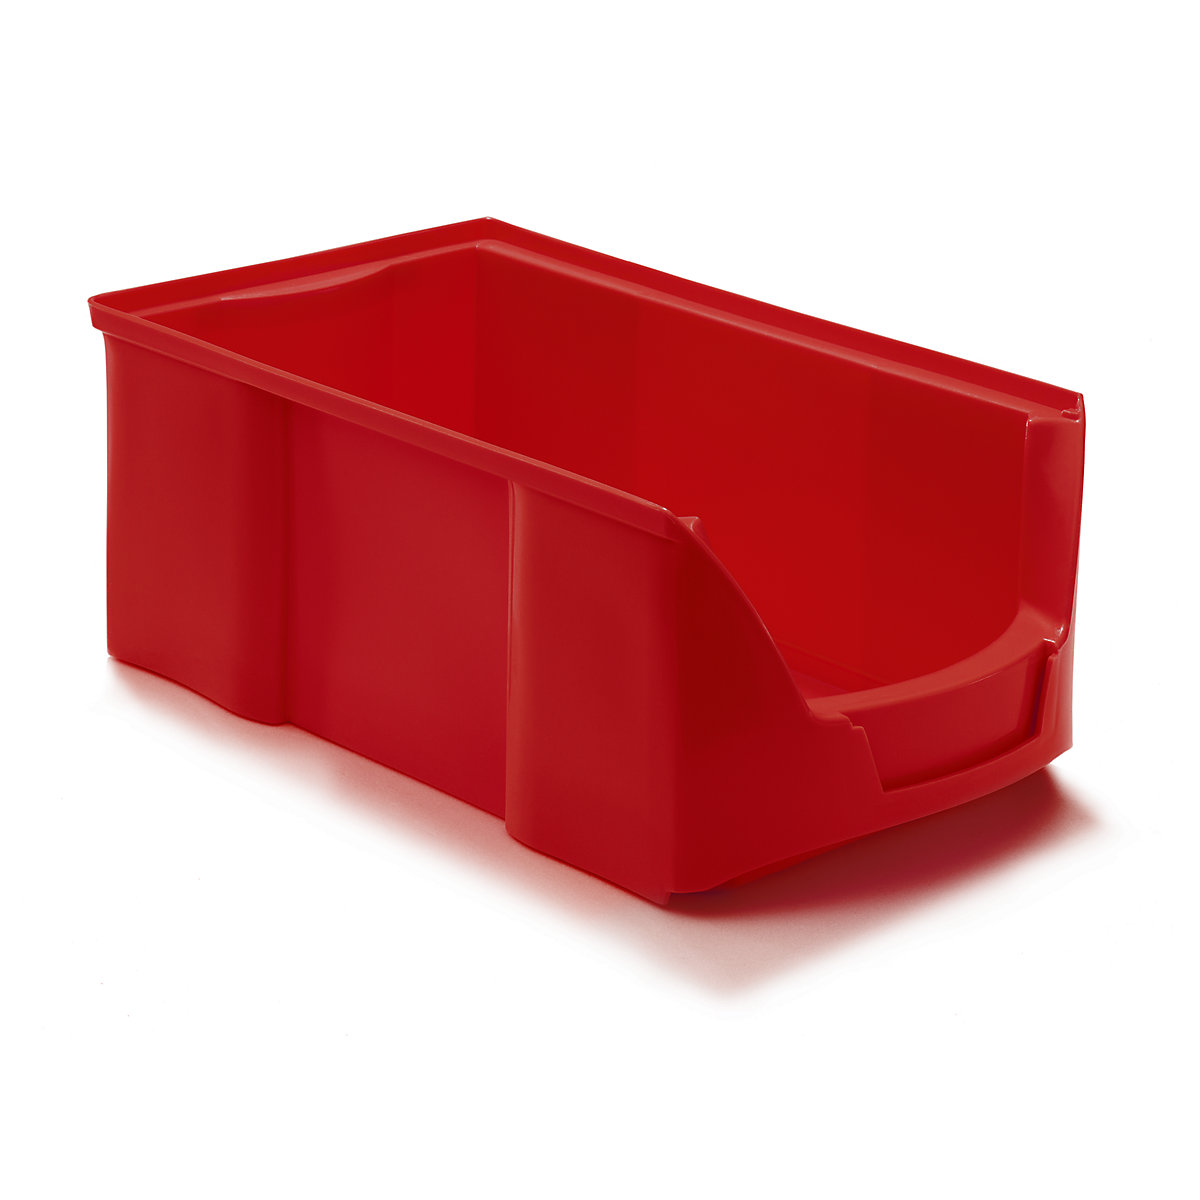 FUTURA open fronted storage bin made of polyethylene, LxWxH 360 x 208 x 147 mm, pack of 12, red-15